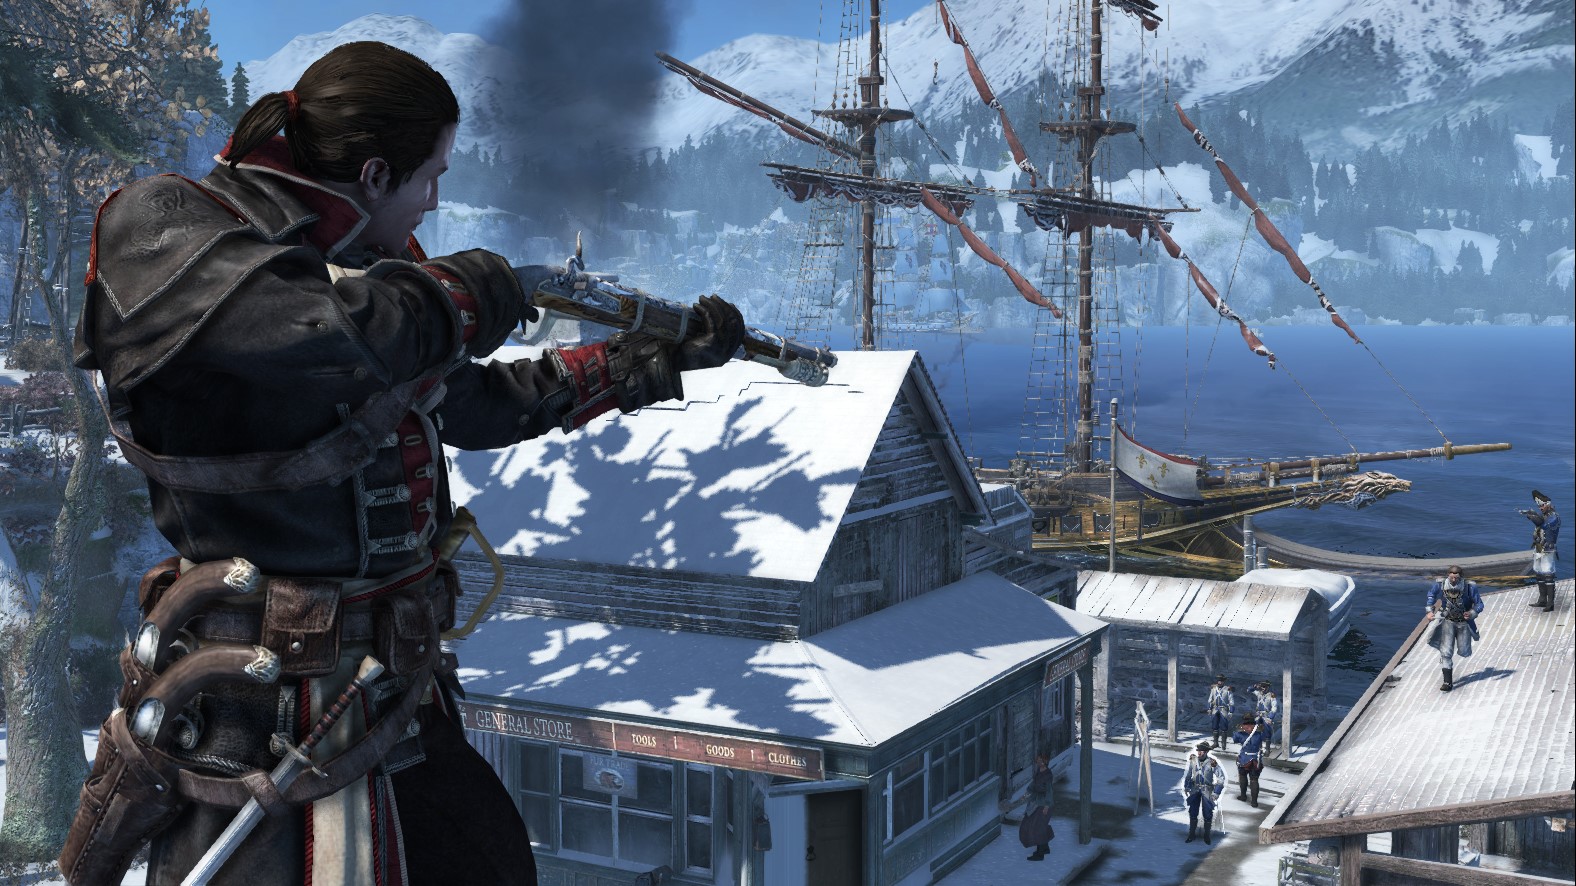 Assassin´s Creed Rogue Deluxe Edition (Uplay key) @ RU